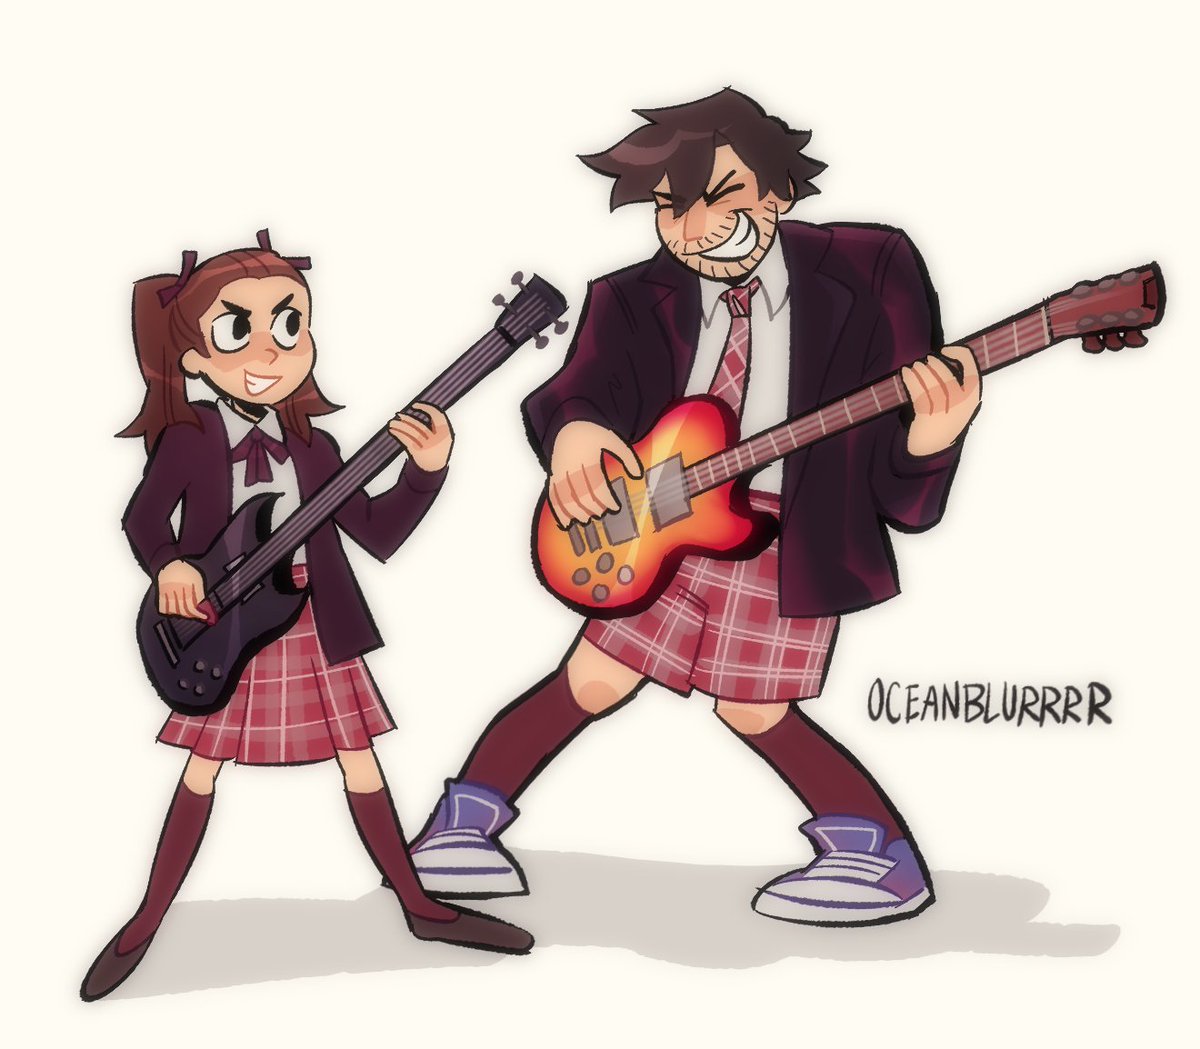 「Stick it to the man!! 🎸⚡️✨ #schoolofroc」|Blurr 🪲のイラスト